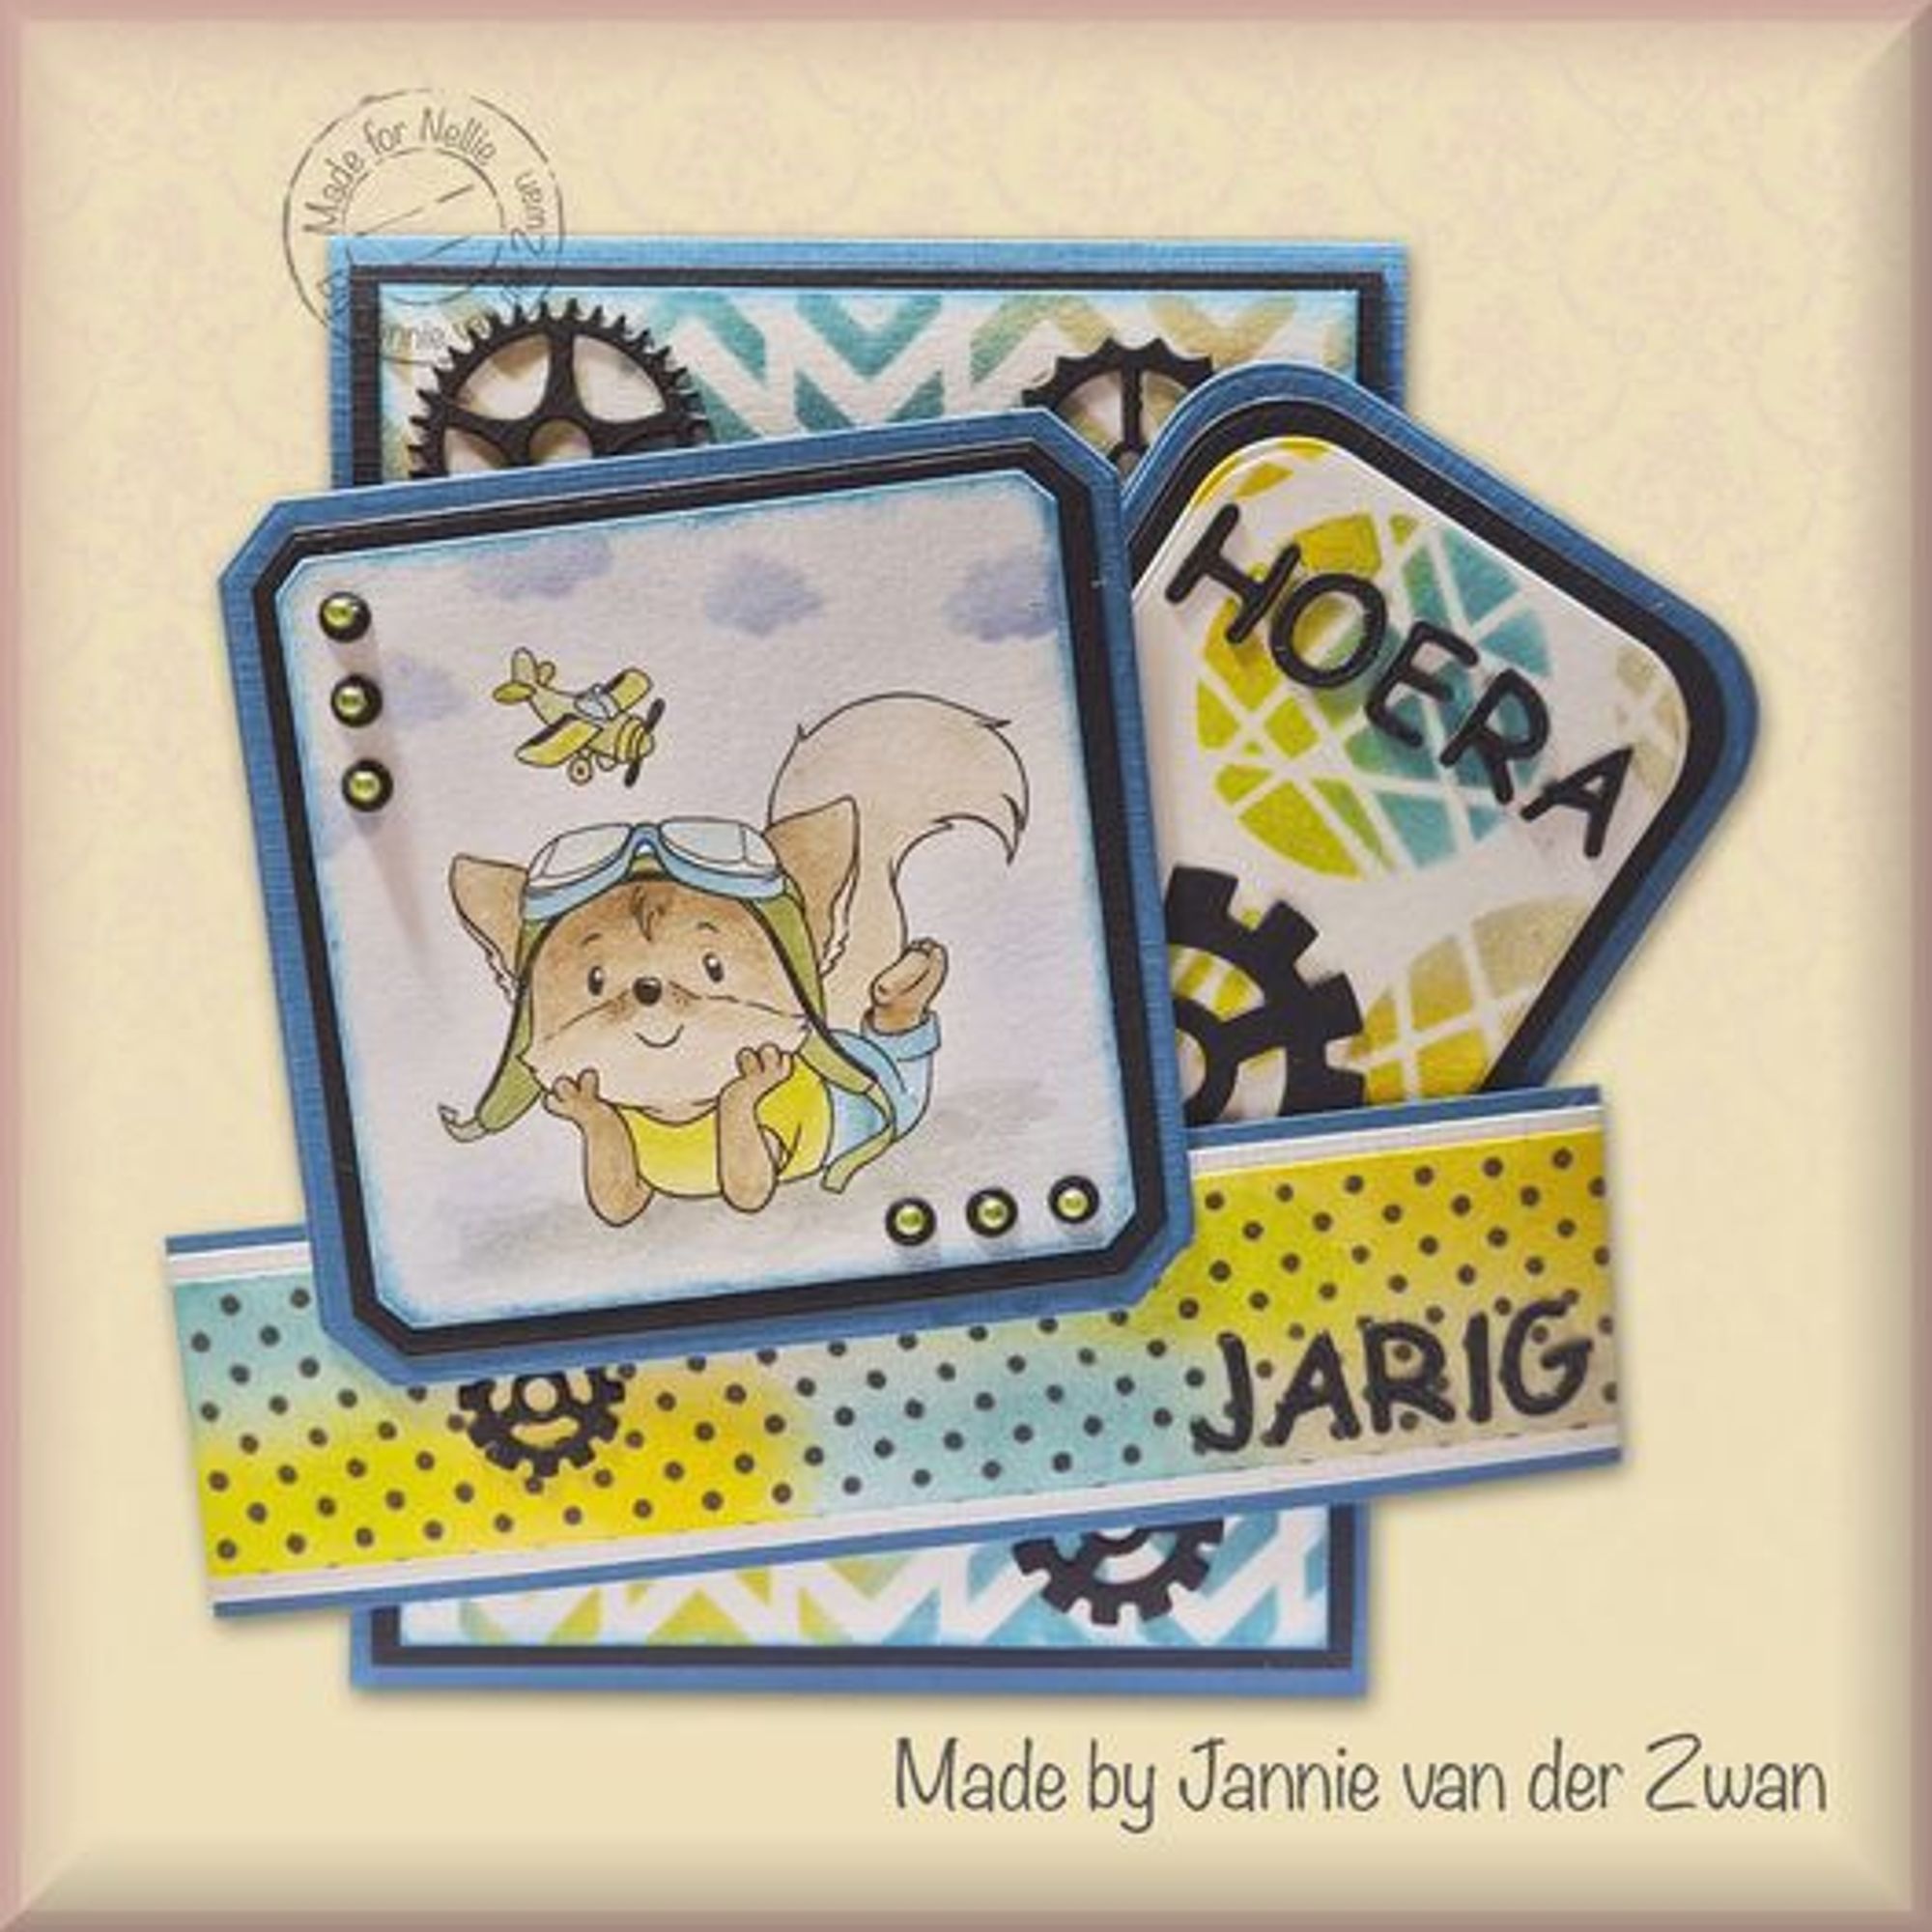 Nellie's Choice Clear Stamp Nellie's Cuties - Dreaming To Be A Pilot